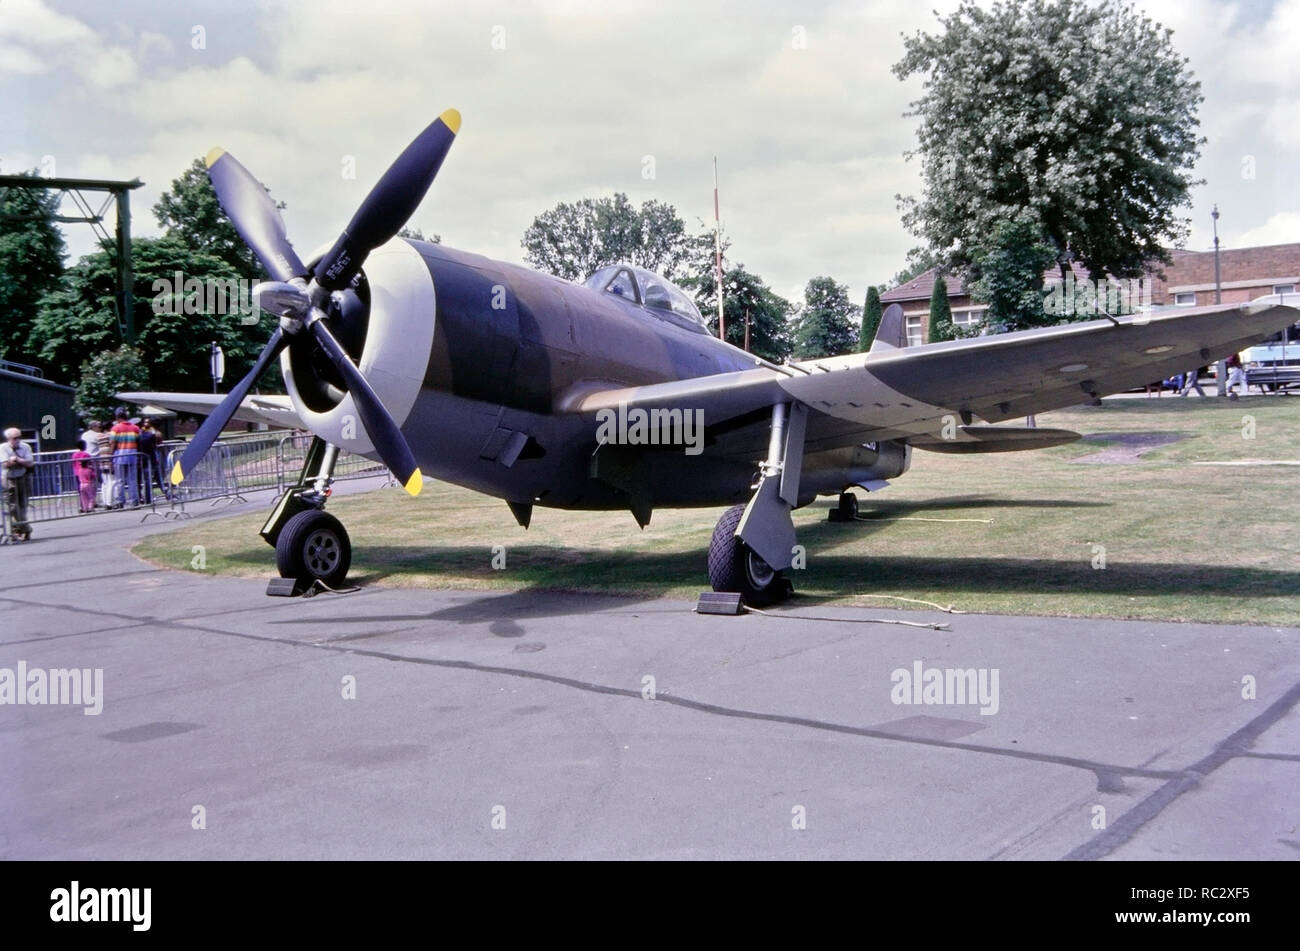 P-47D Thunderbolt fighter aircraft, RAF Cosford 1995 Stock Photo